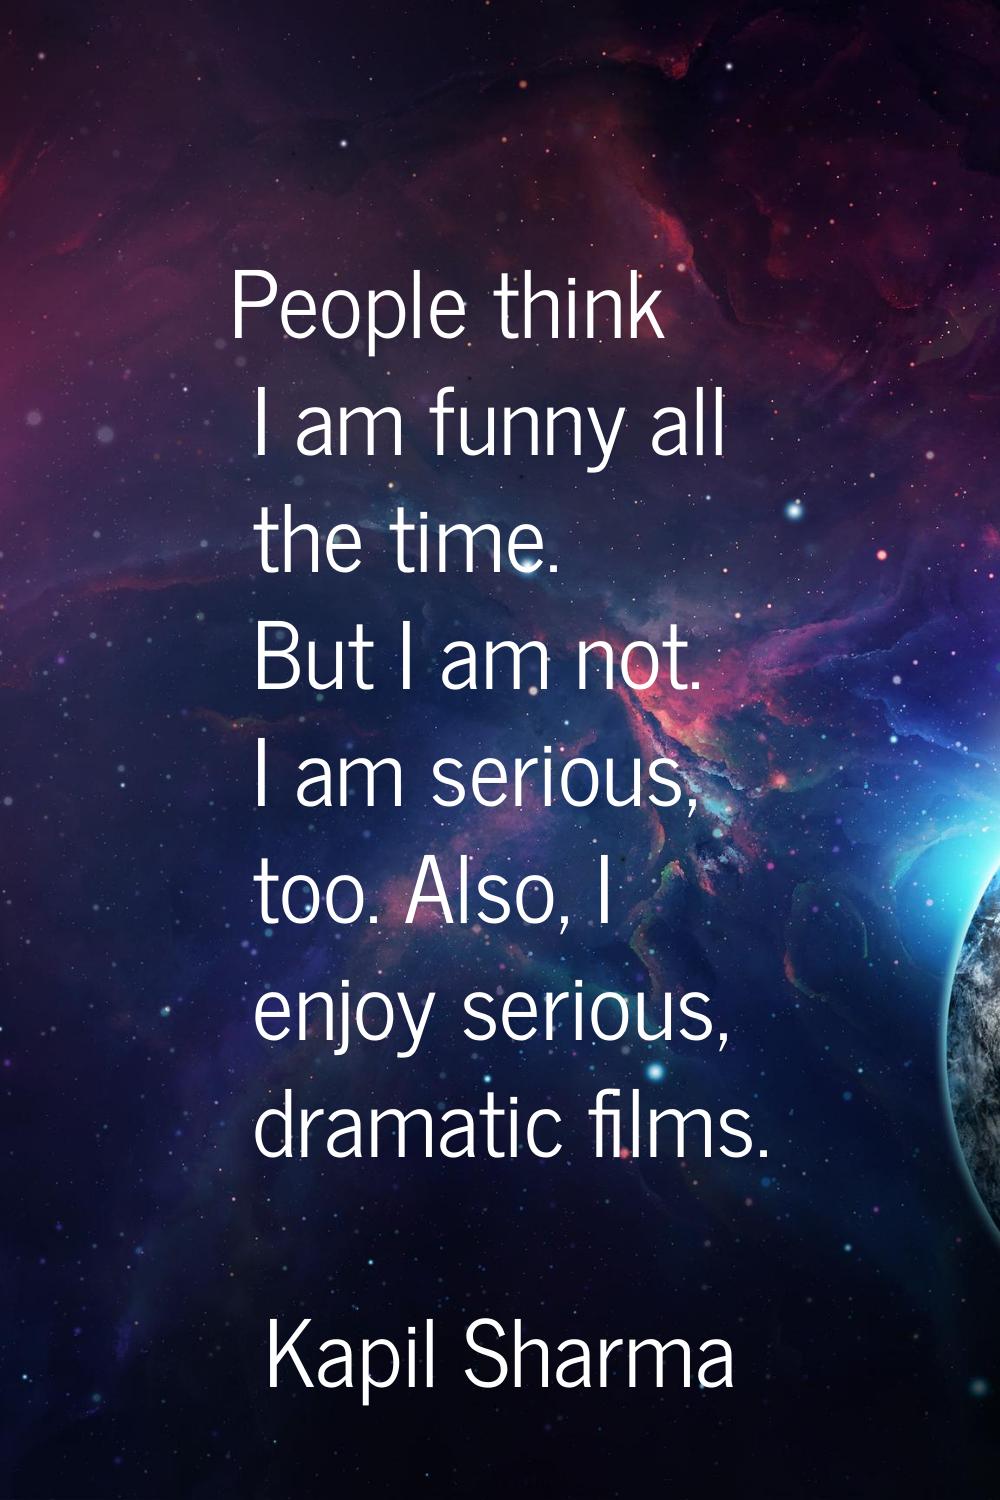 People think I am funny all the time. But I am not. I am serious, too. Also, I enjoy serious, drama